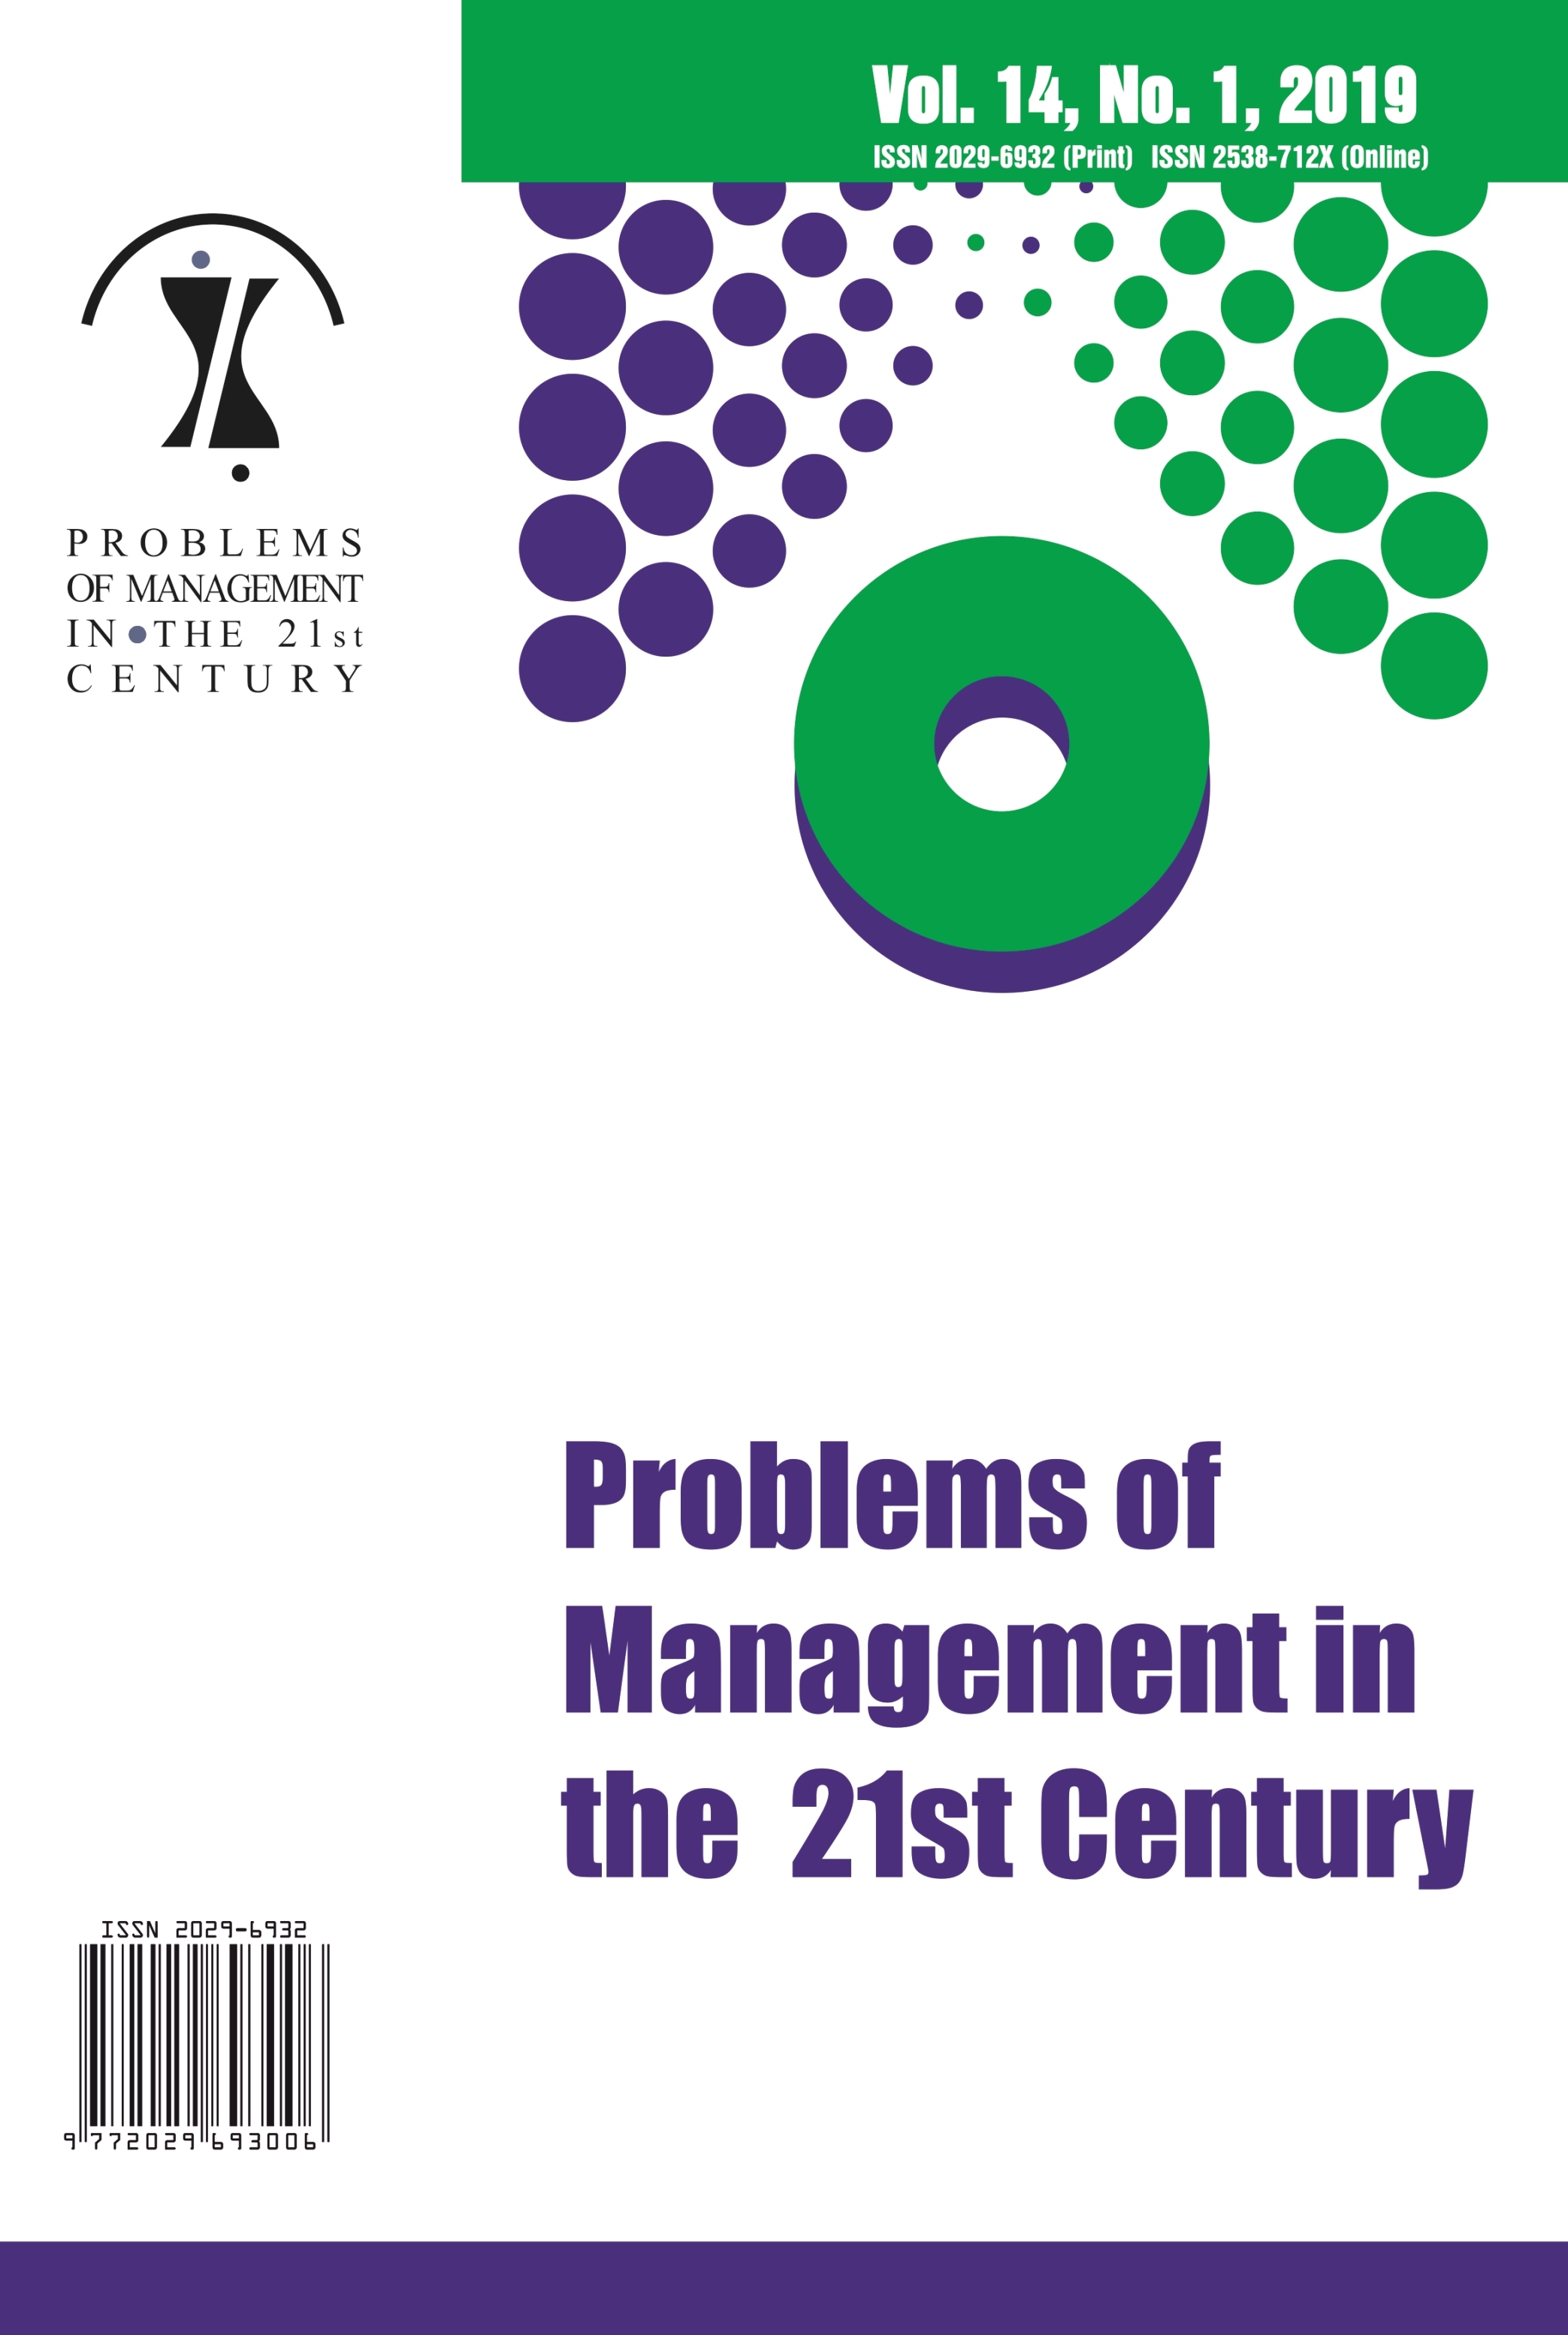 HUMAN CAPITAL AS A DETERMINANT OF STRATEGIC HUMAN RESOURCES MANAGEMENT IN PUBLIC ADMINISTRATION ON THE EXAMPLE OF POLAND Cover Image